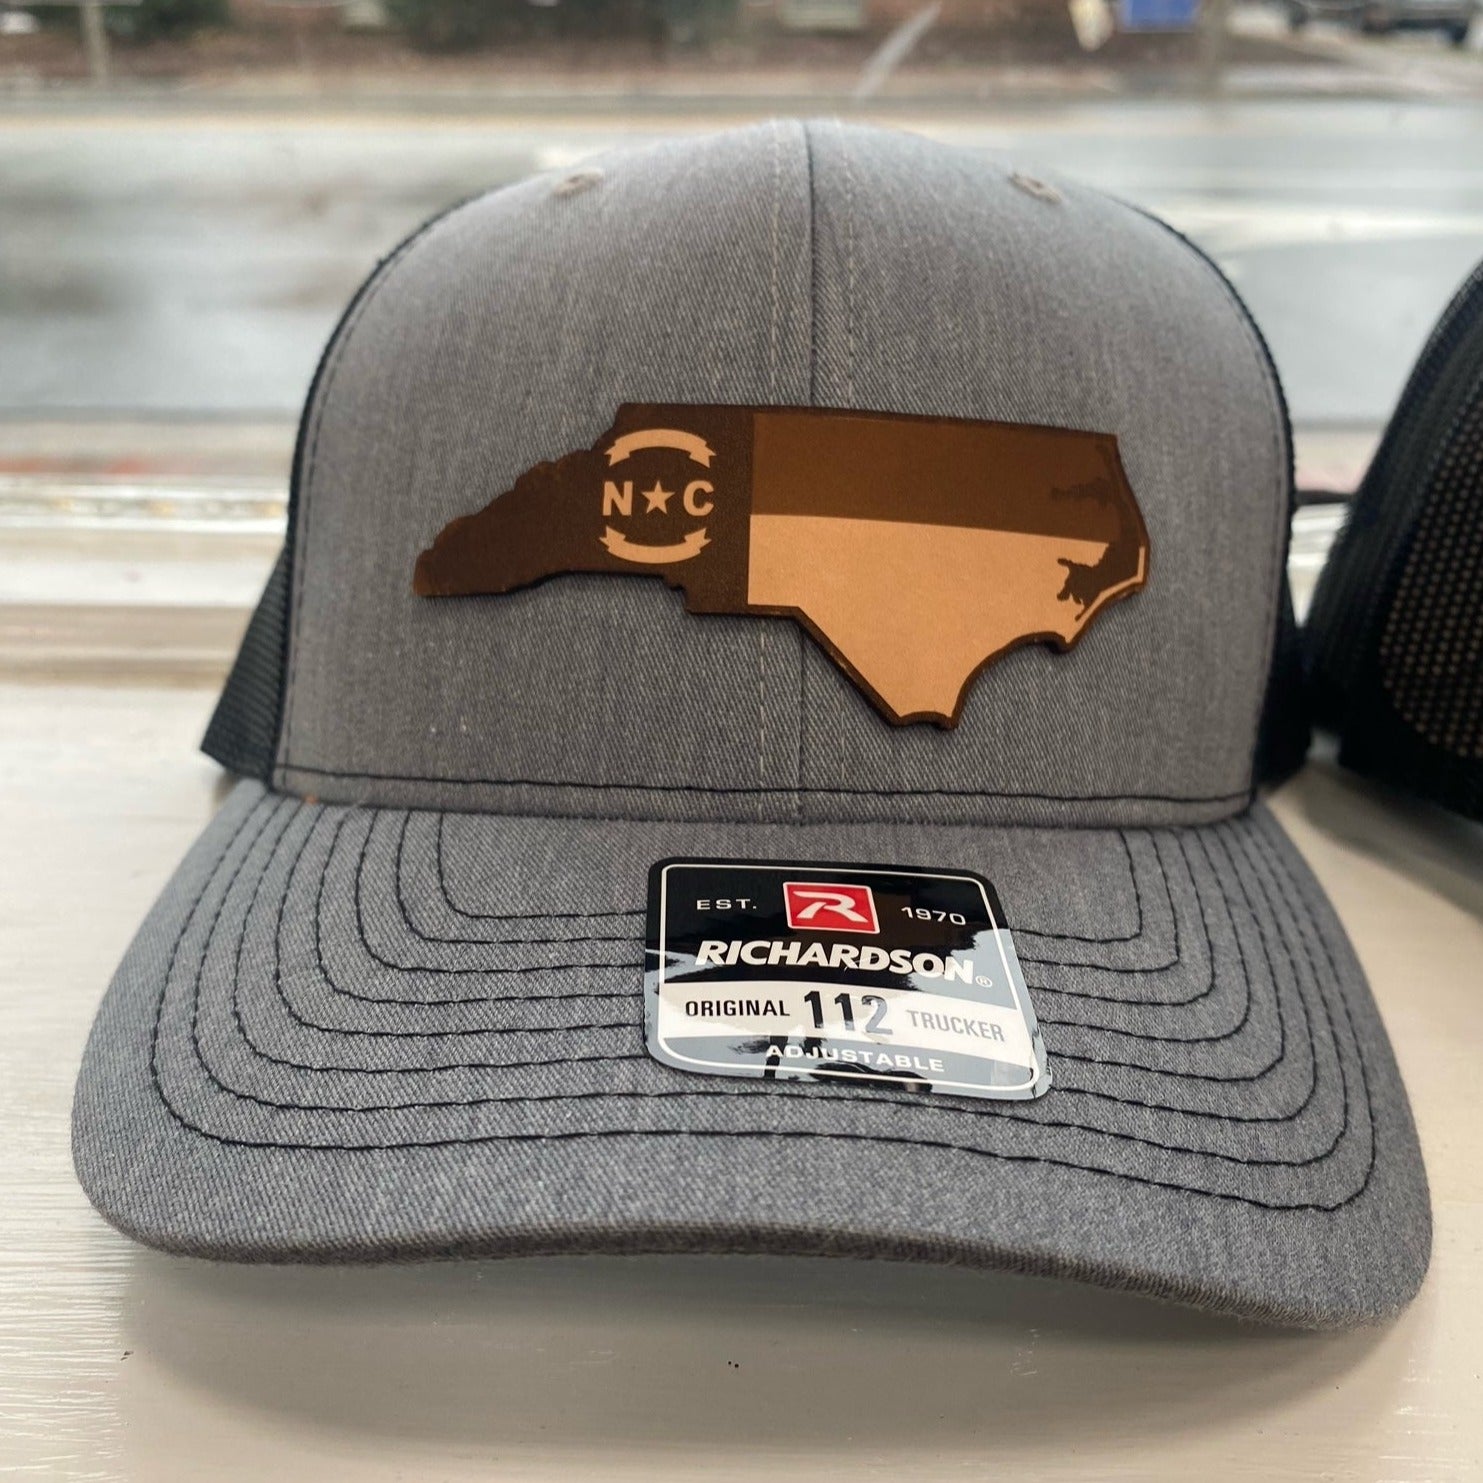 Grey and black hat with a North Carolina shape emblem with the NC flag on it